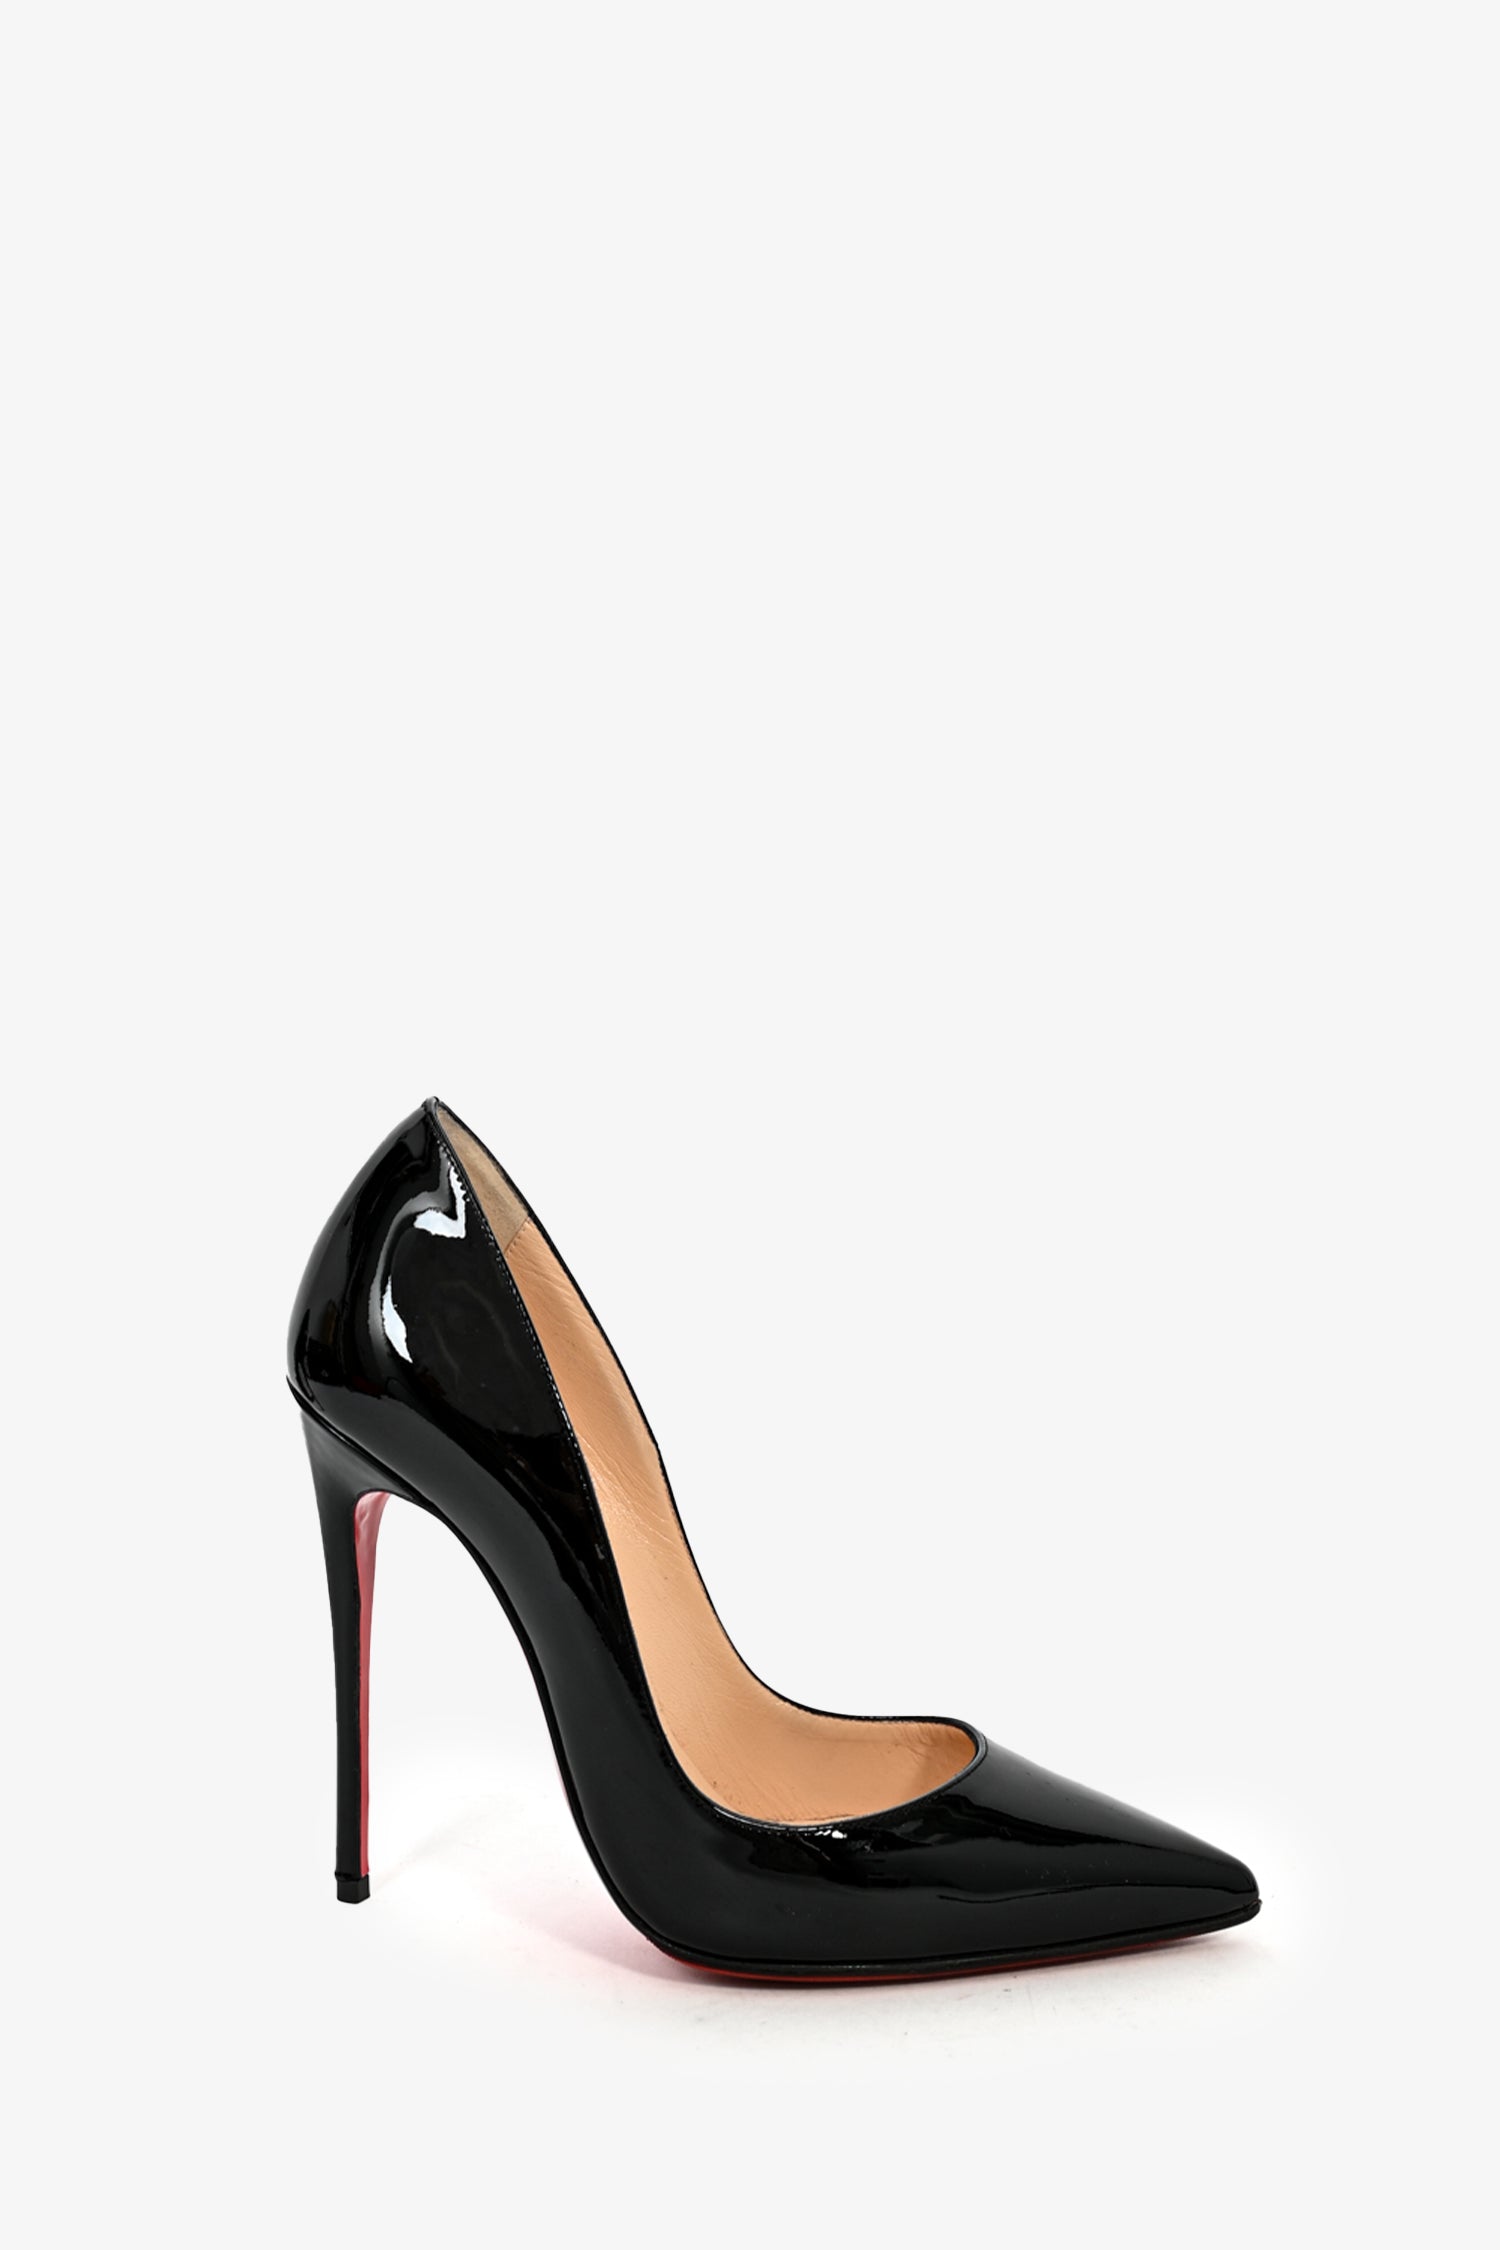 Christian Louboutin So Kate 120 Black Patent Leather Pumps Heels (Size  35.5)